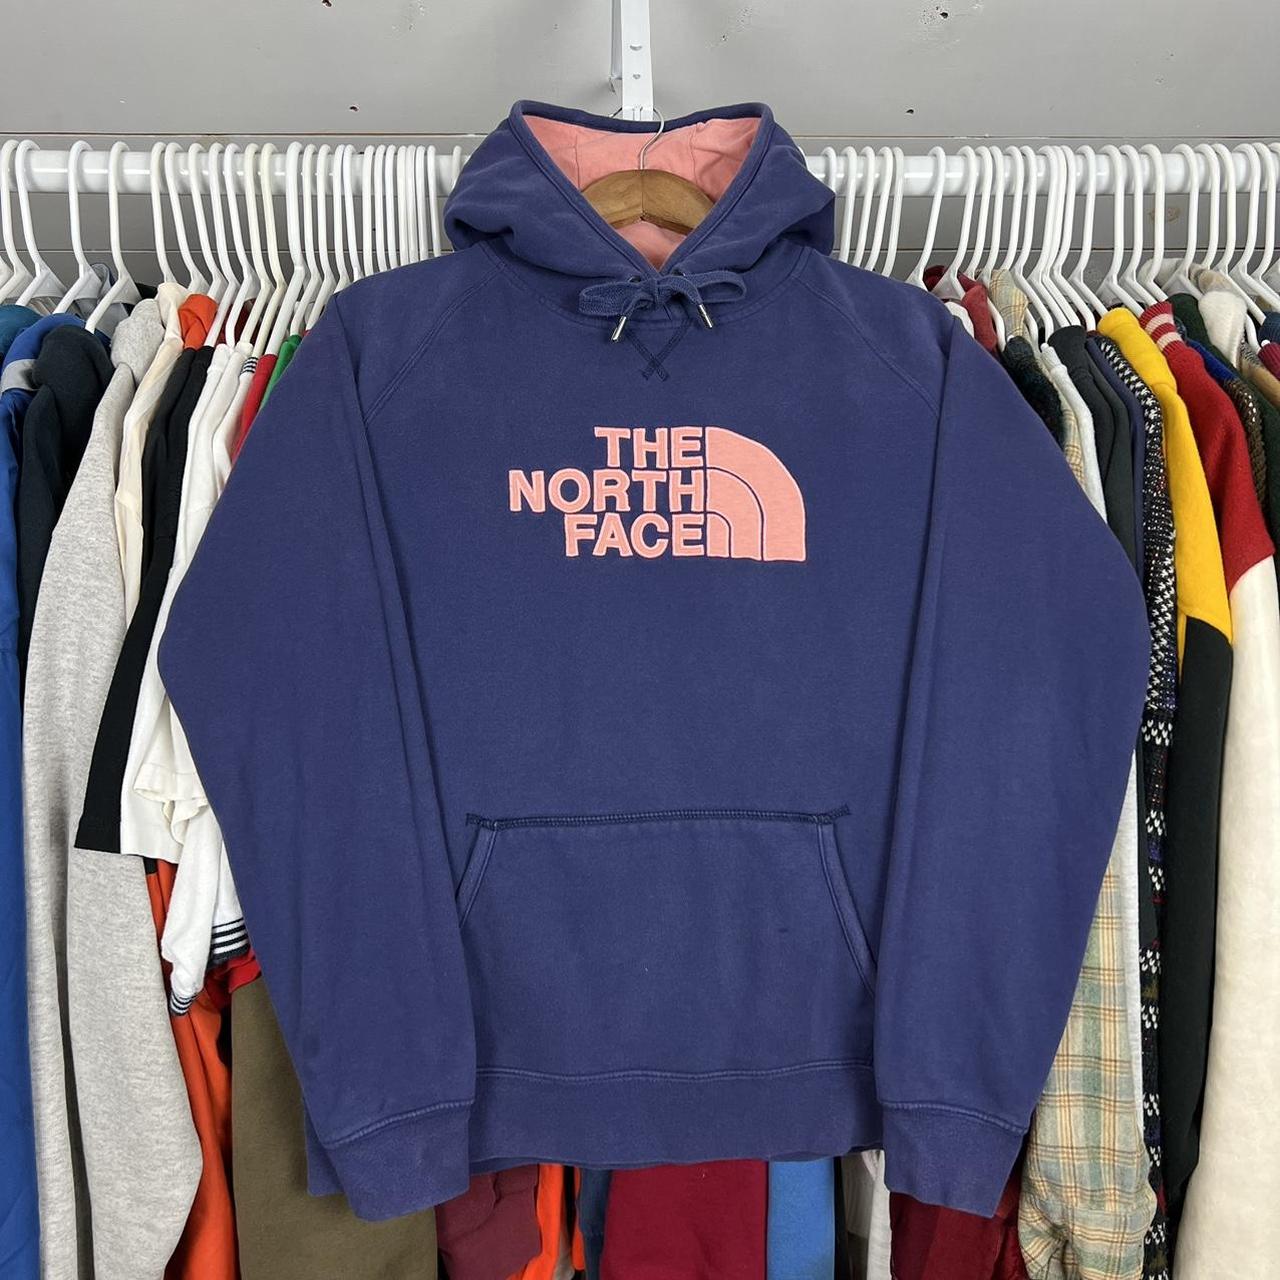 The North Face Women's Navy and Pink Hoodie